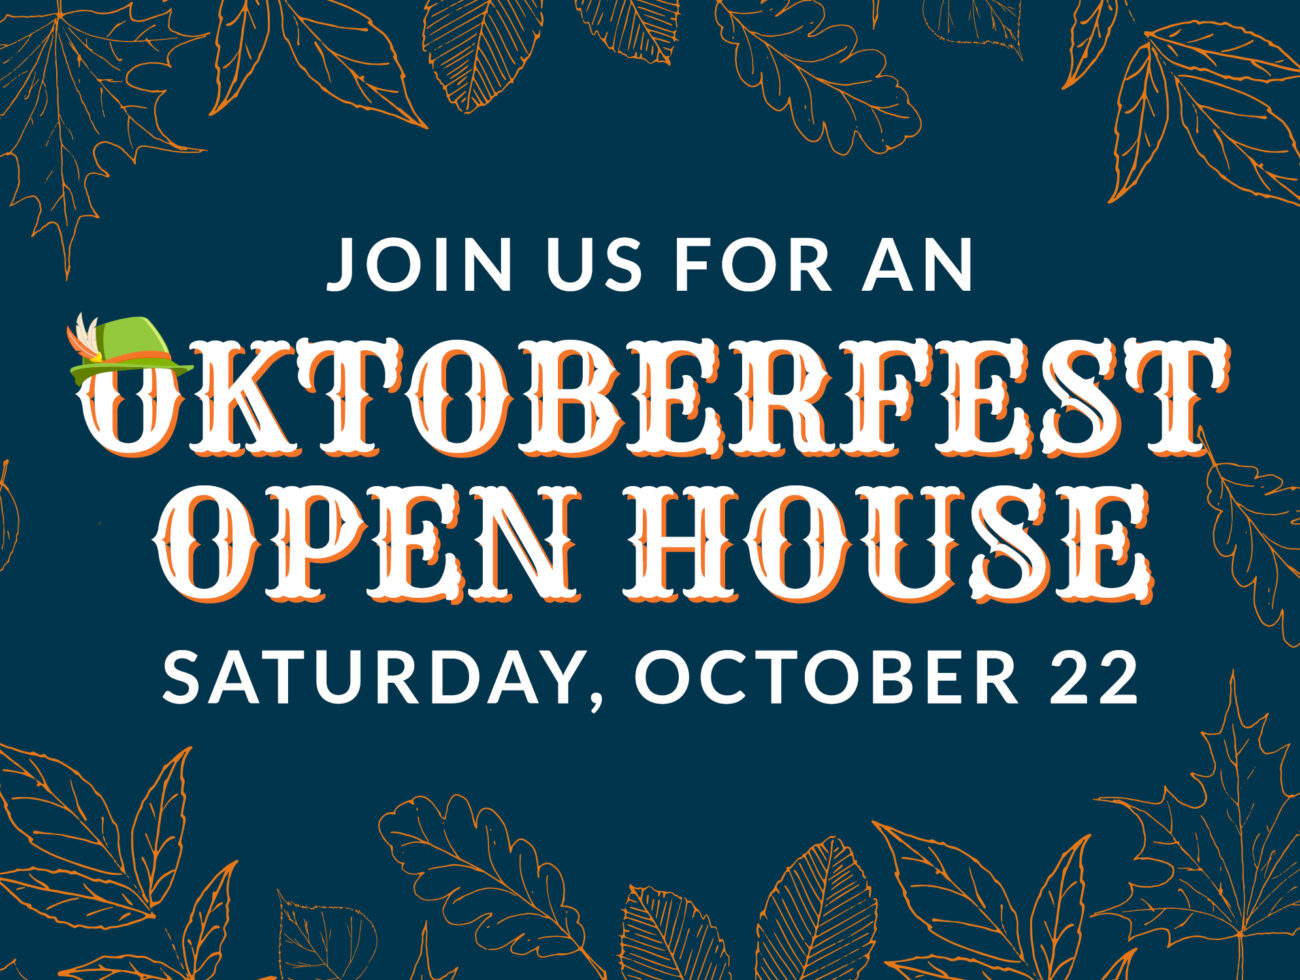 Join us for an Oktoberfest Open House at Central Baptist Village